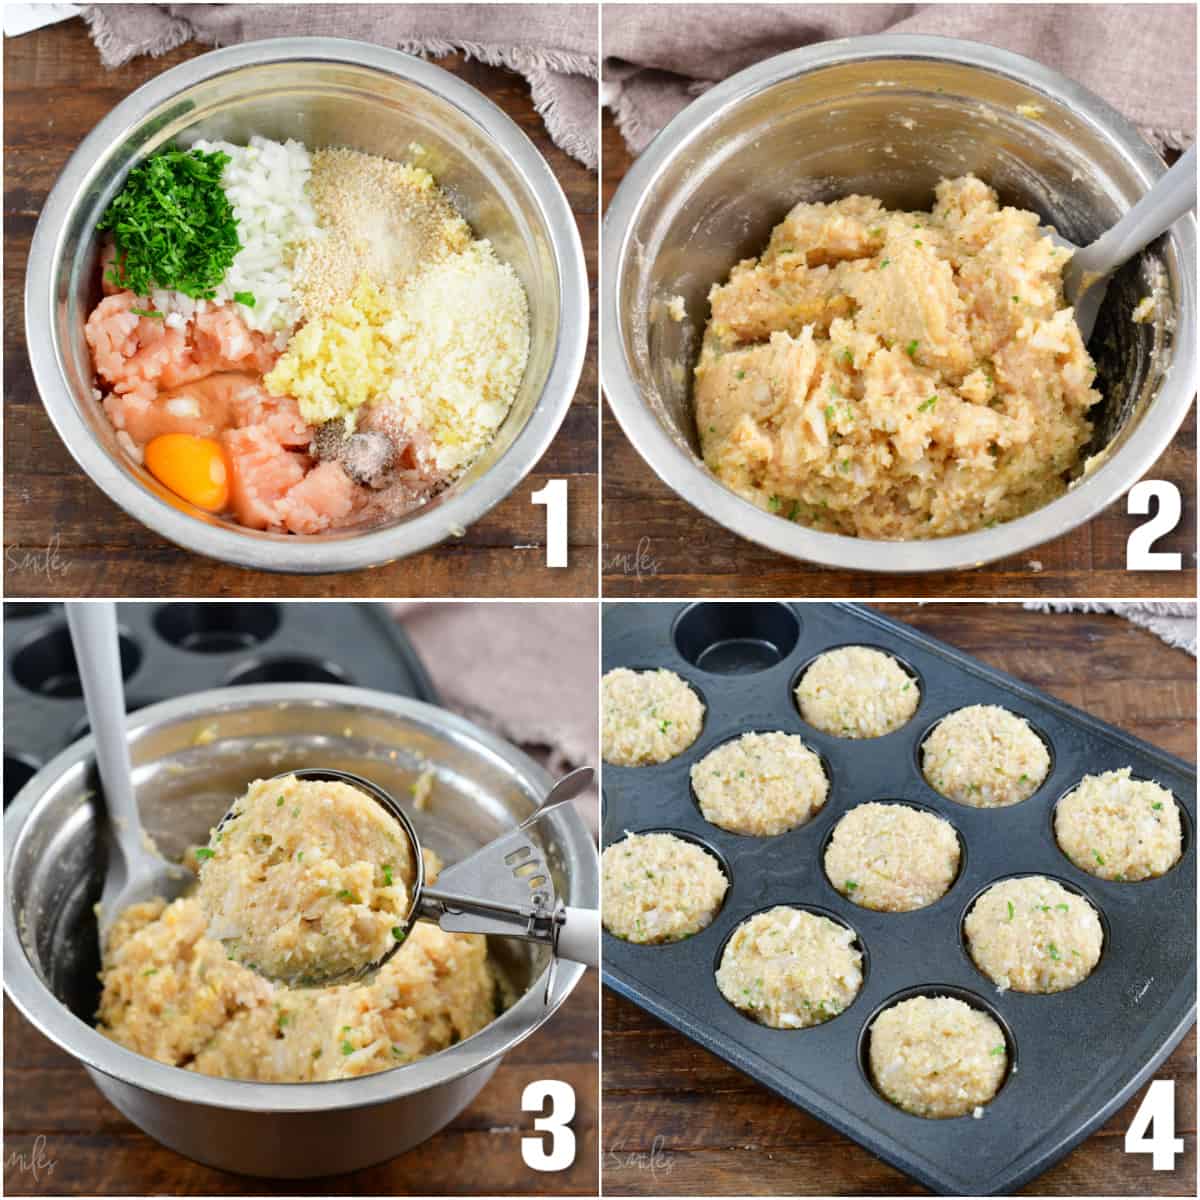 The first image shows the meatball ingredients placed in a mixing bowl. The second image shows the ingredients all mixed together. The third image shows a cookie scoop scooping the mixture. The fourth image shows meatballs placed in a baking pan. 